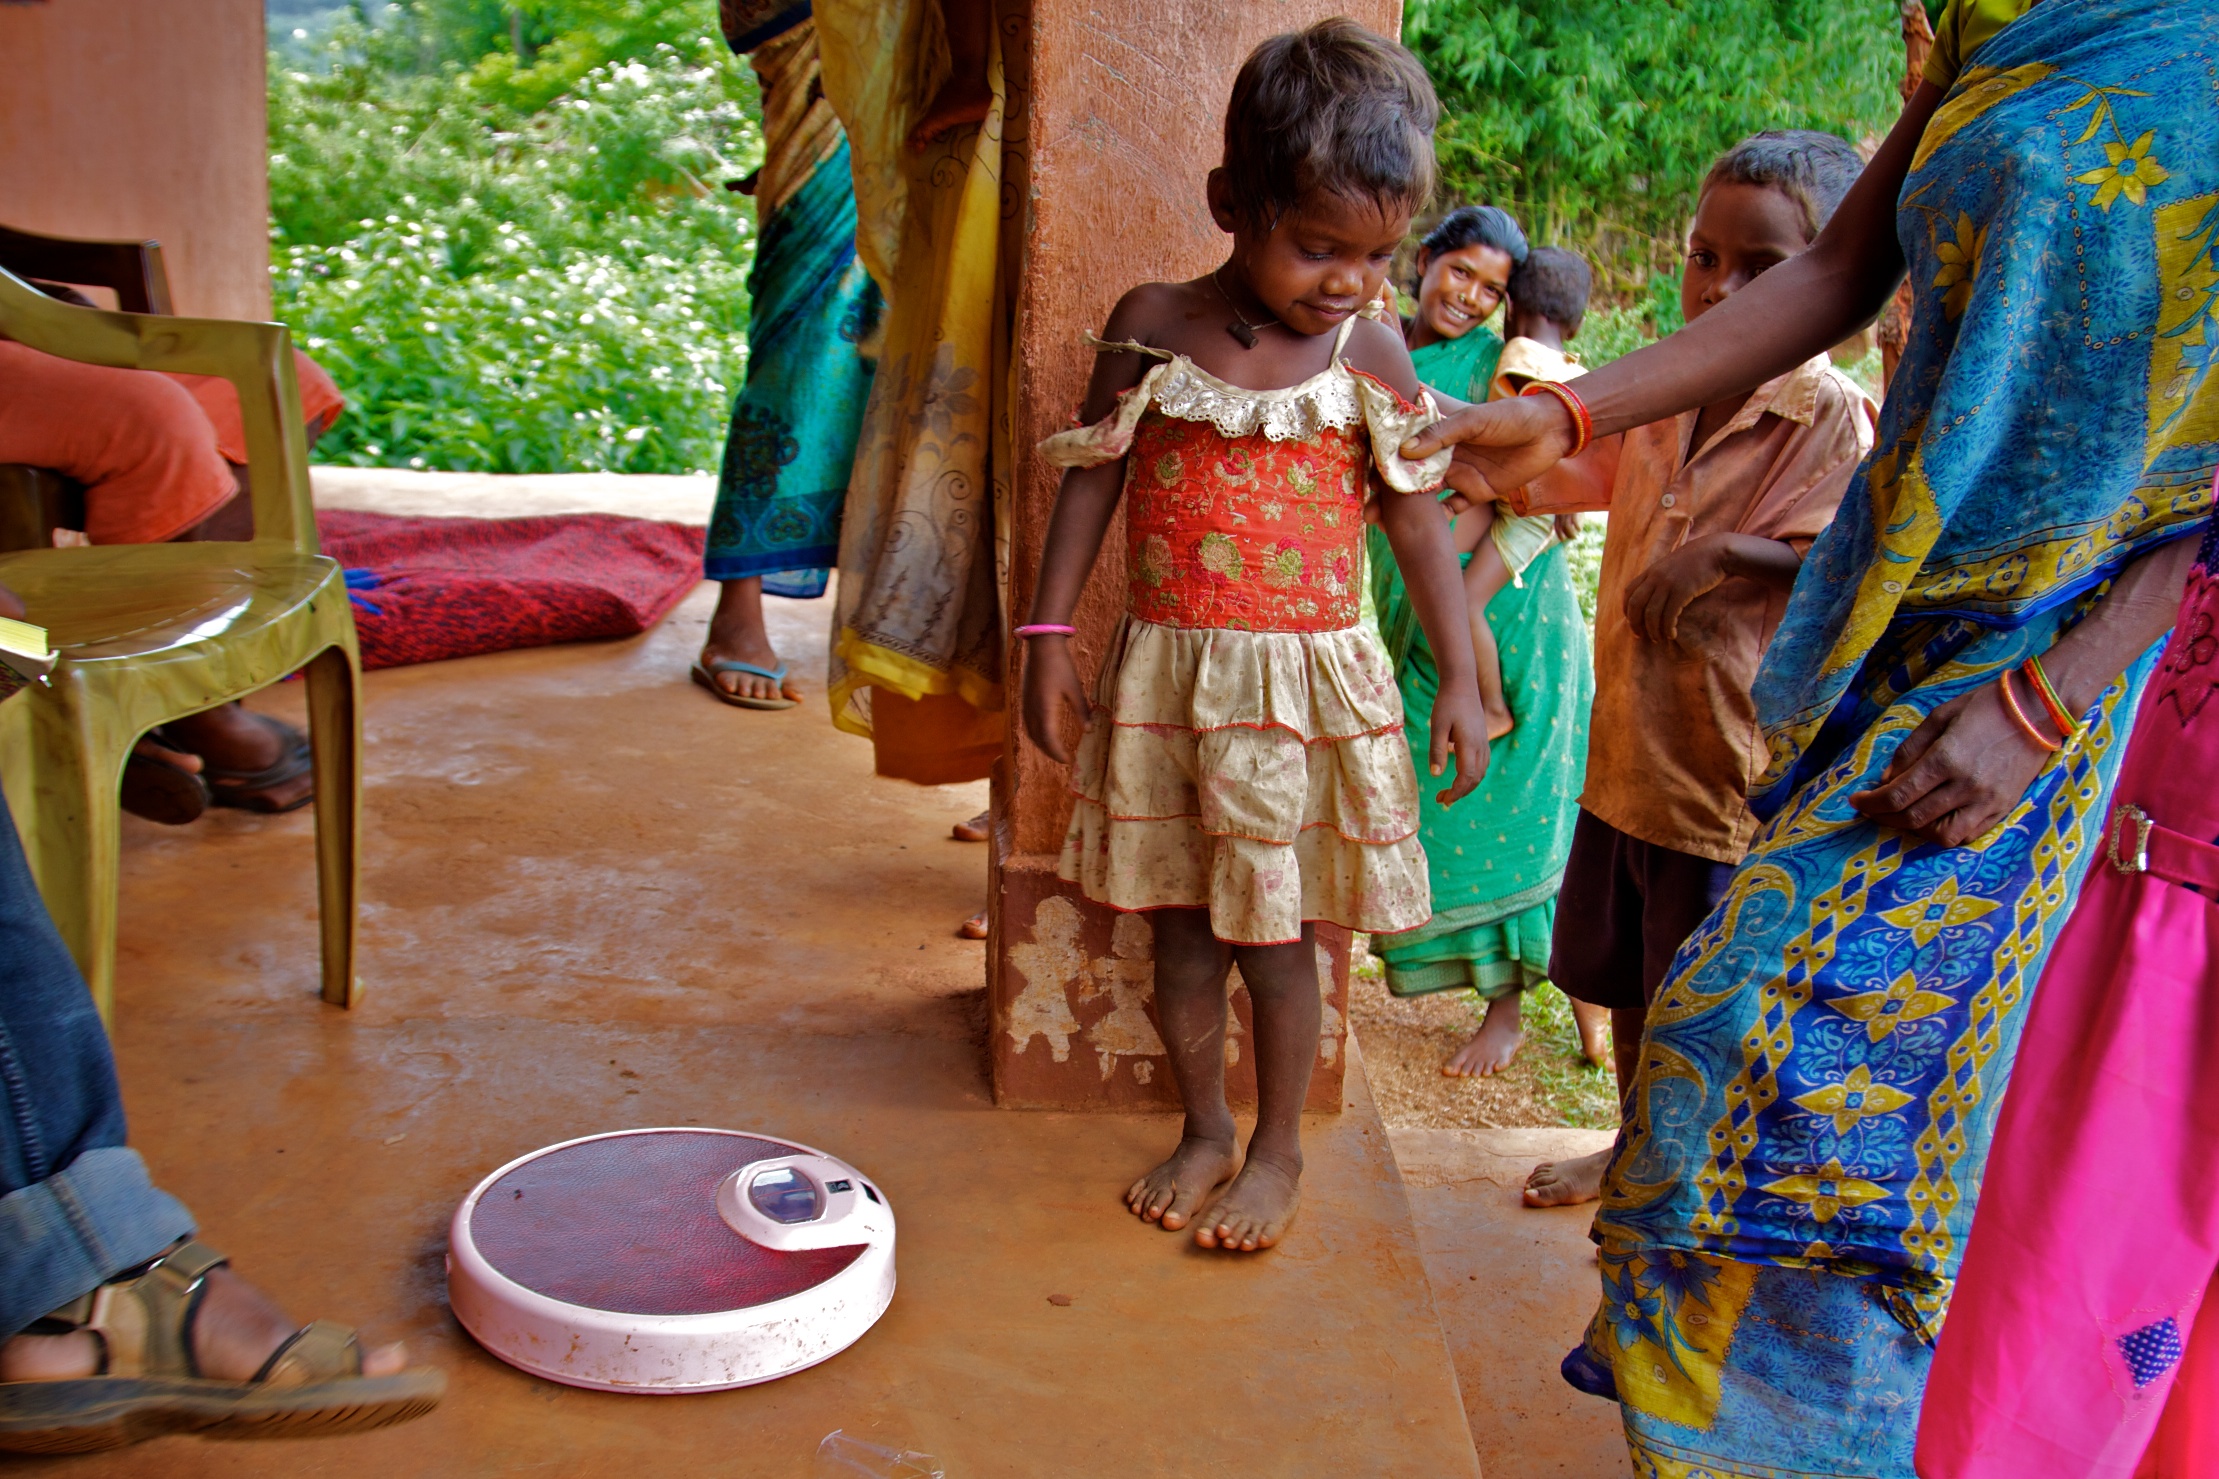 A young Indian girl child standing next to a weighing scale